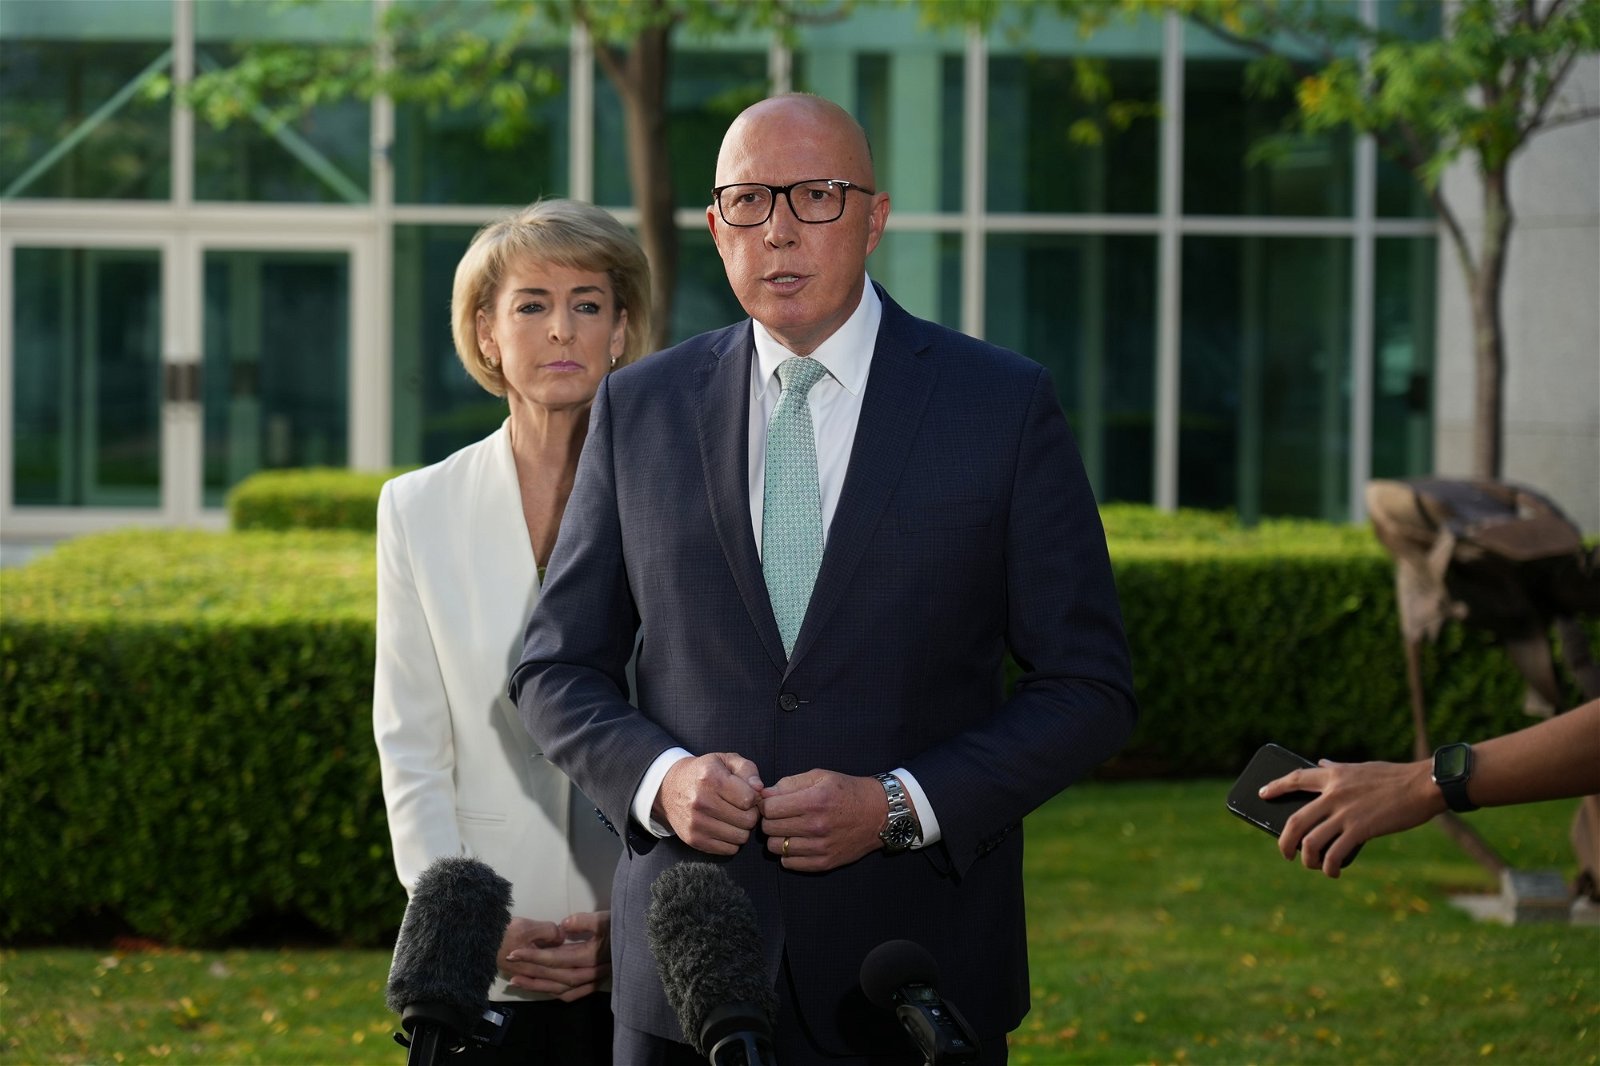 Peter Dutton speaking at a microphone with a woman standing behind him.